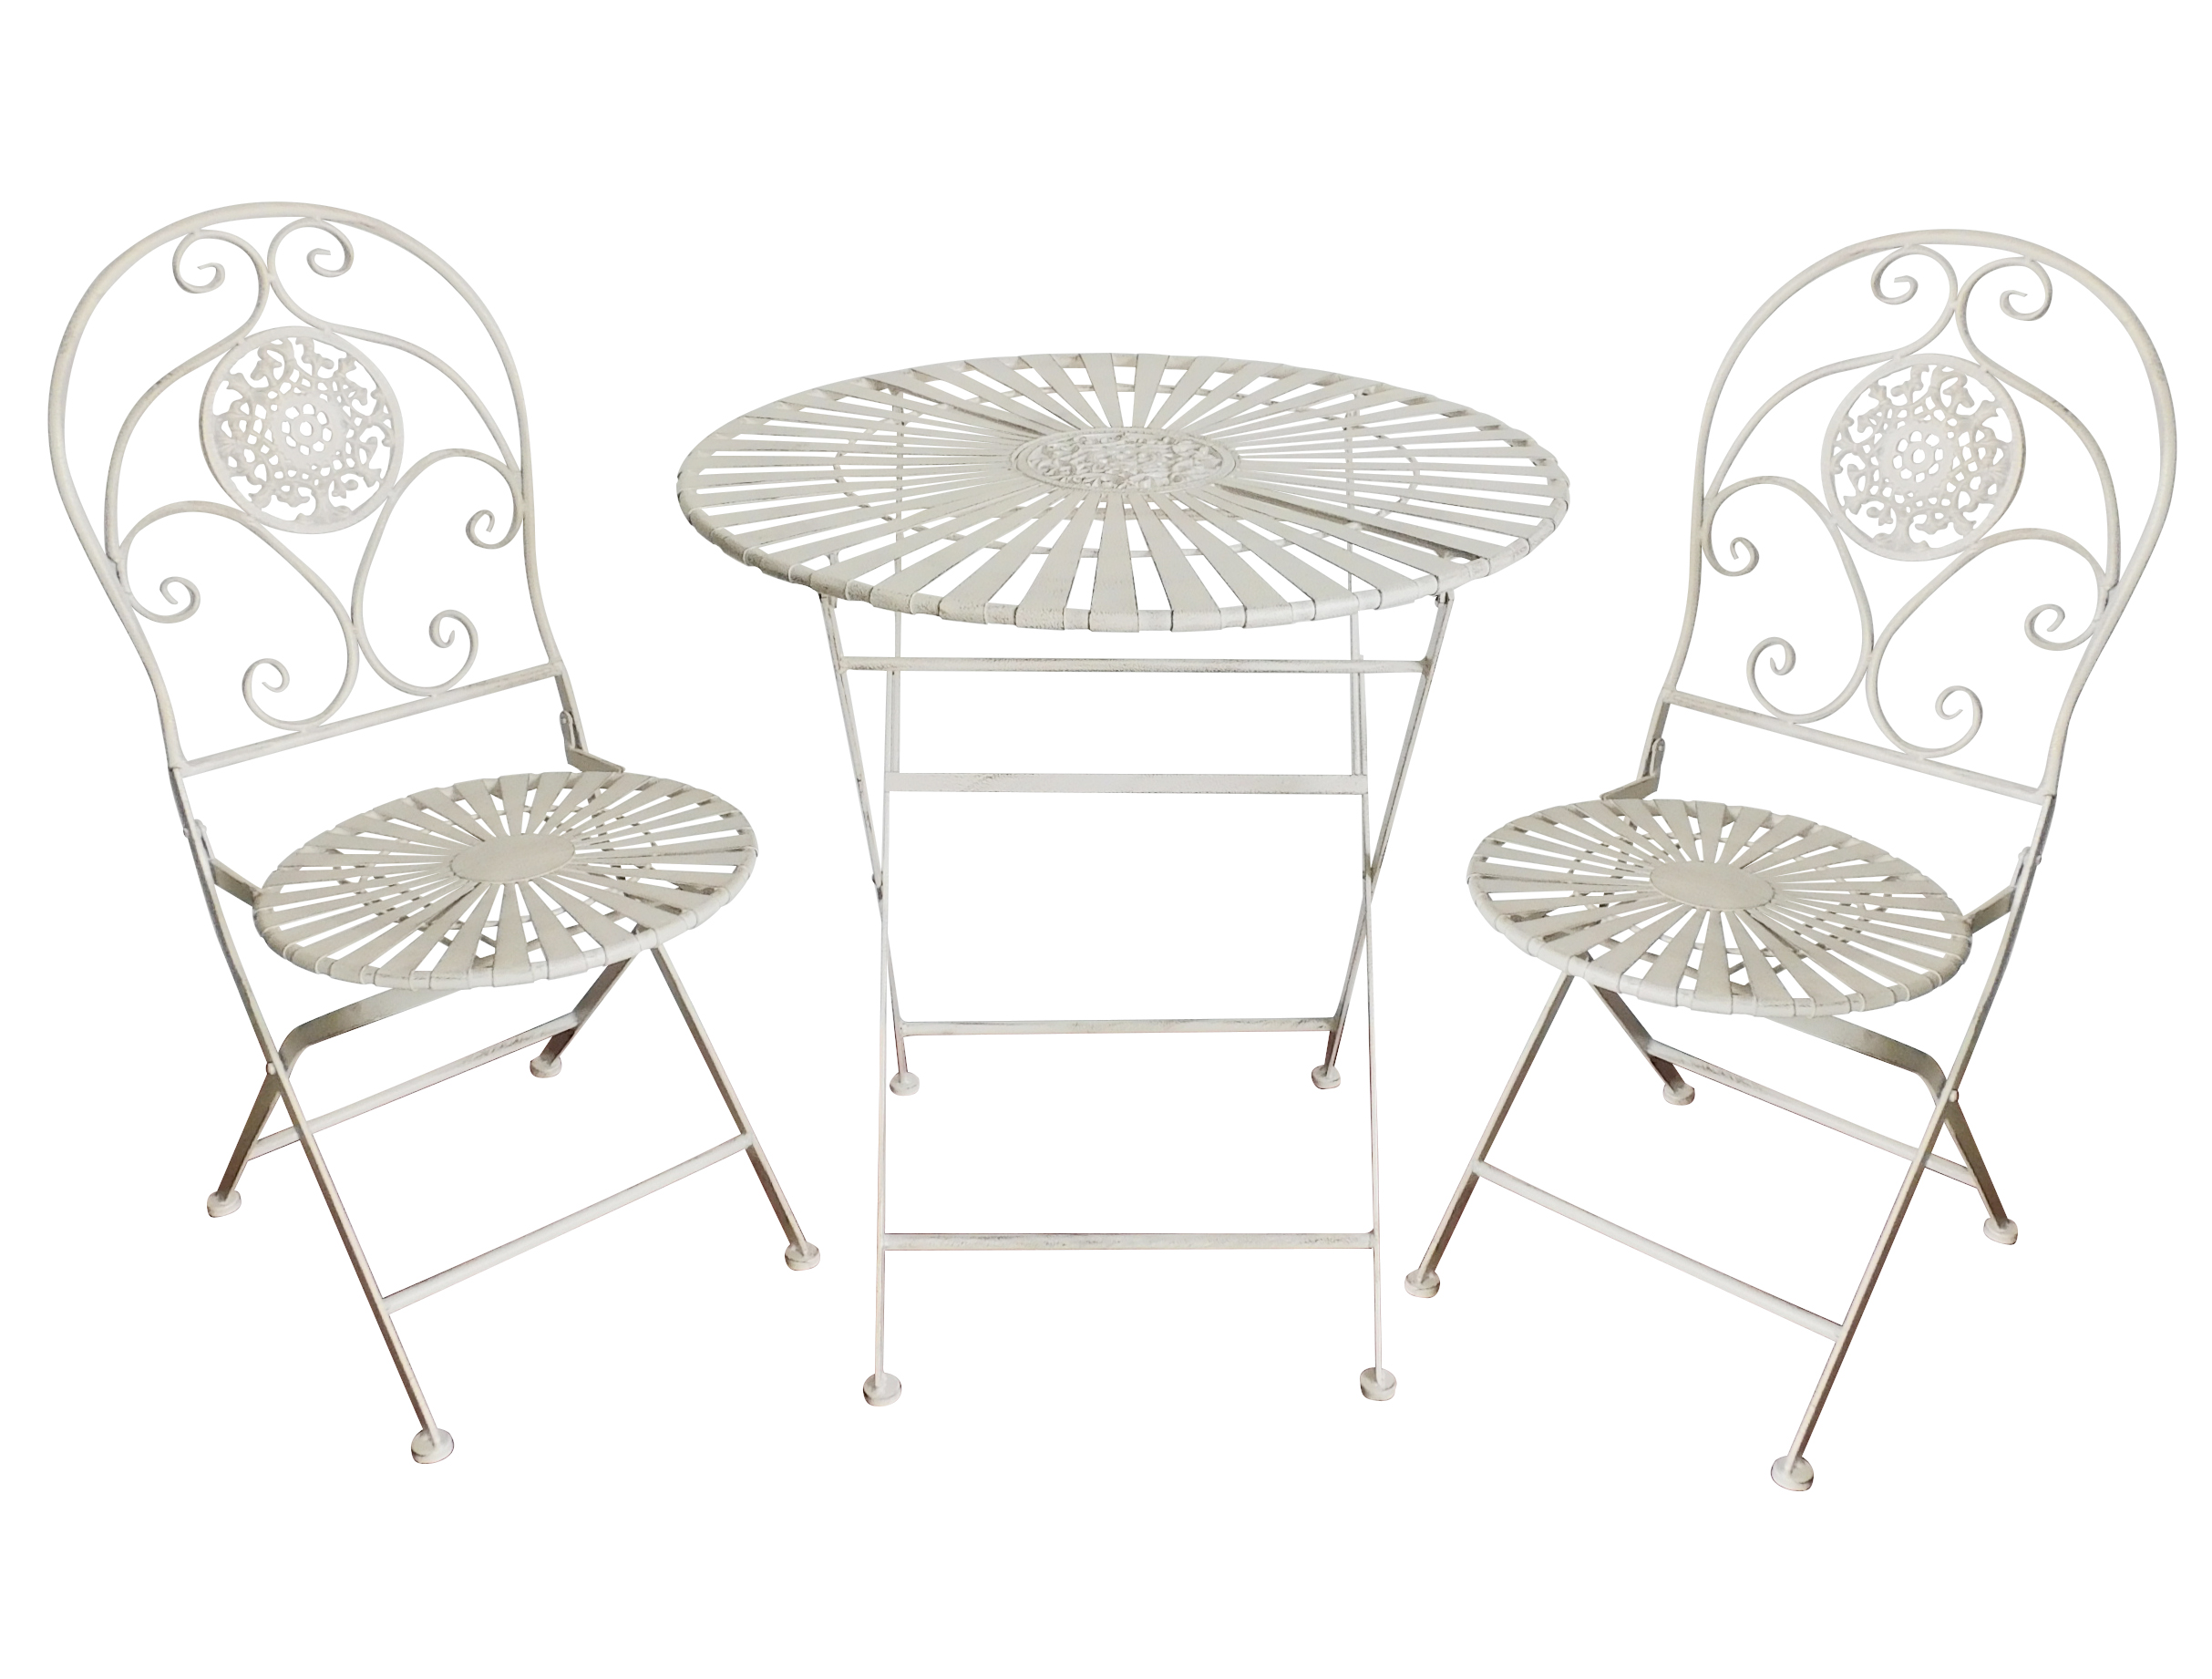 Outdoor Garden Furniture Metal Iron Folding Table And Chair Garden Bistro Sets 7403 Featured Image